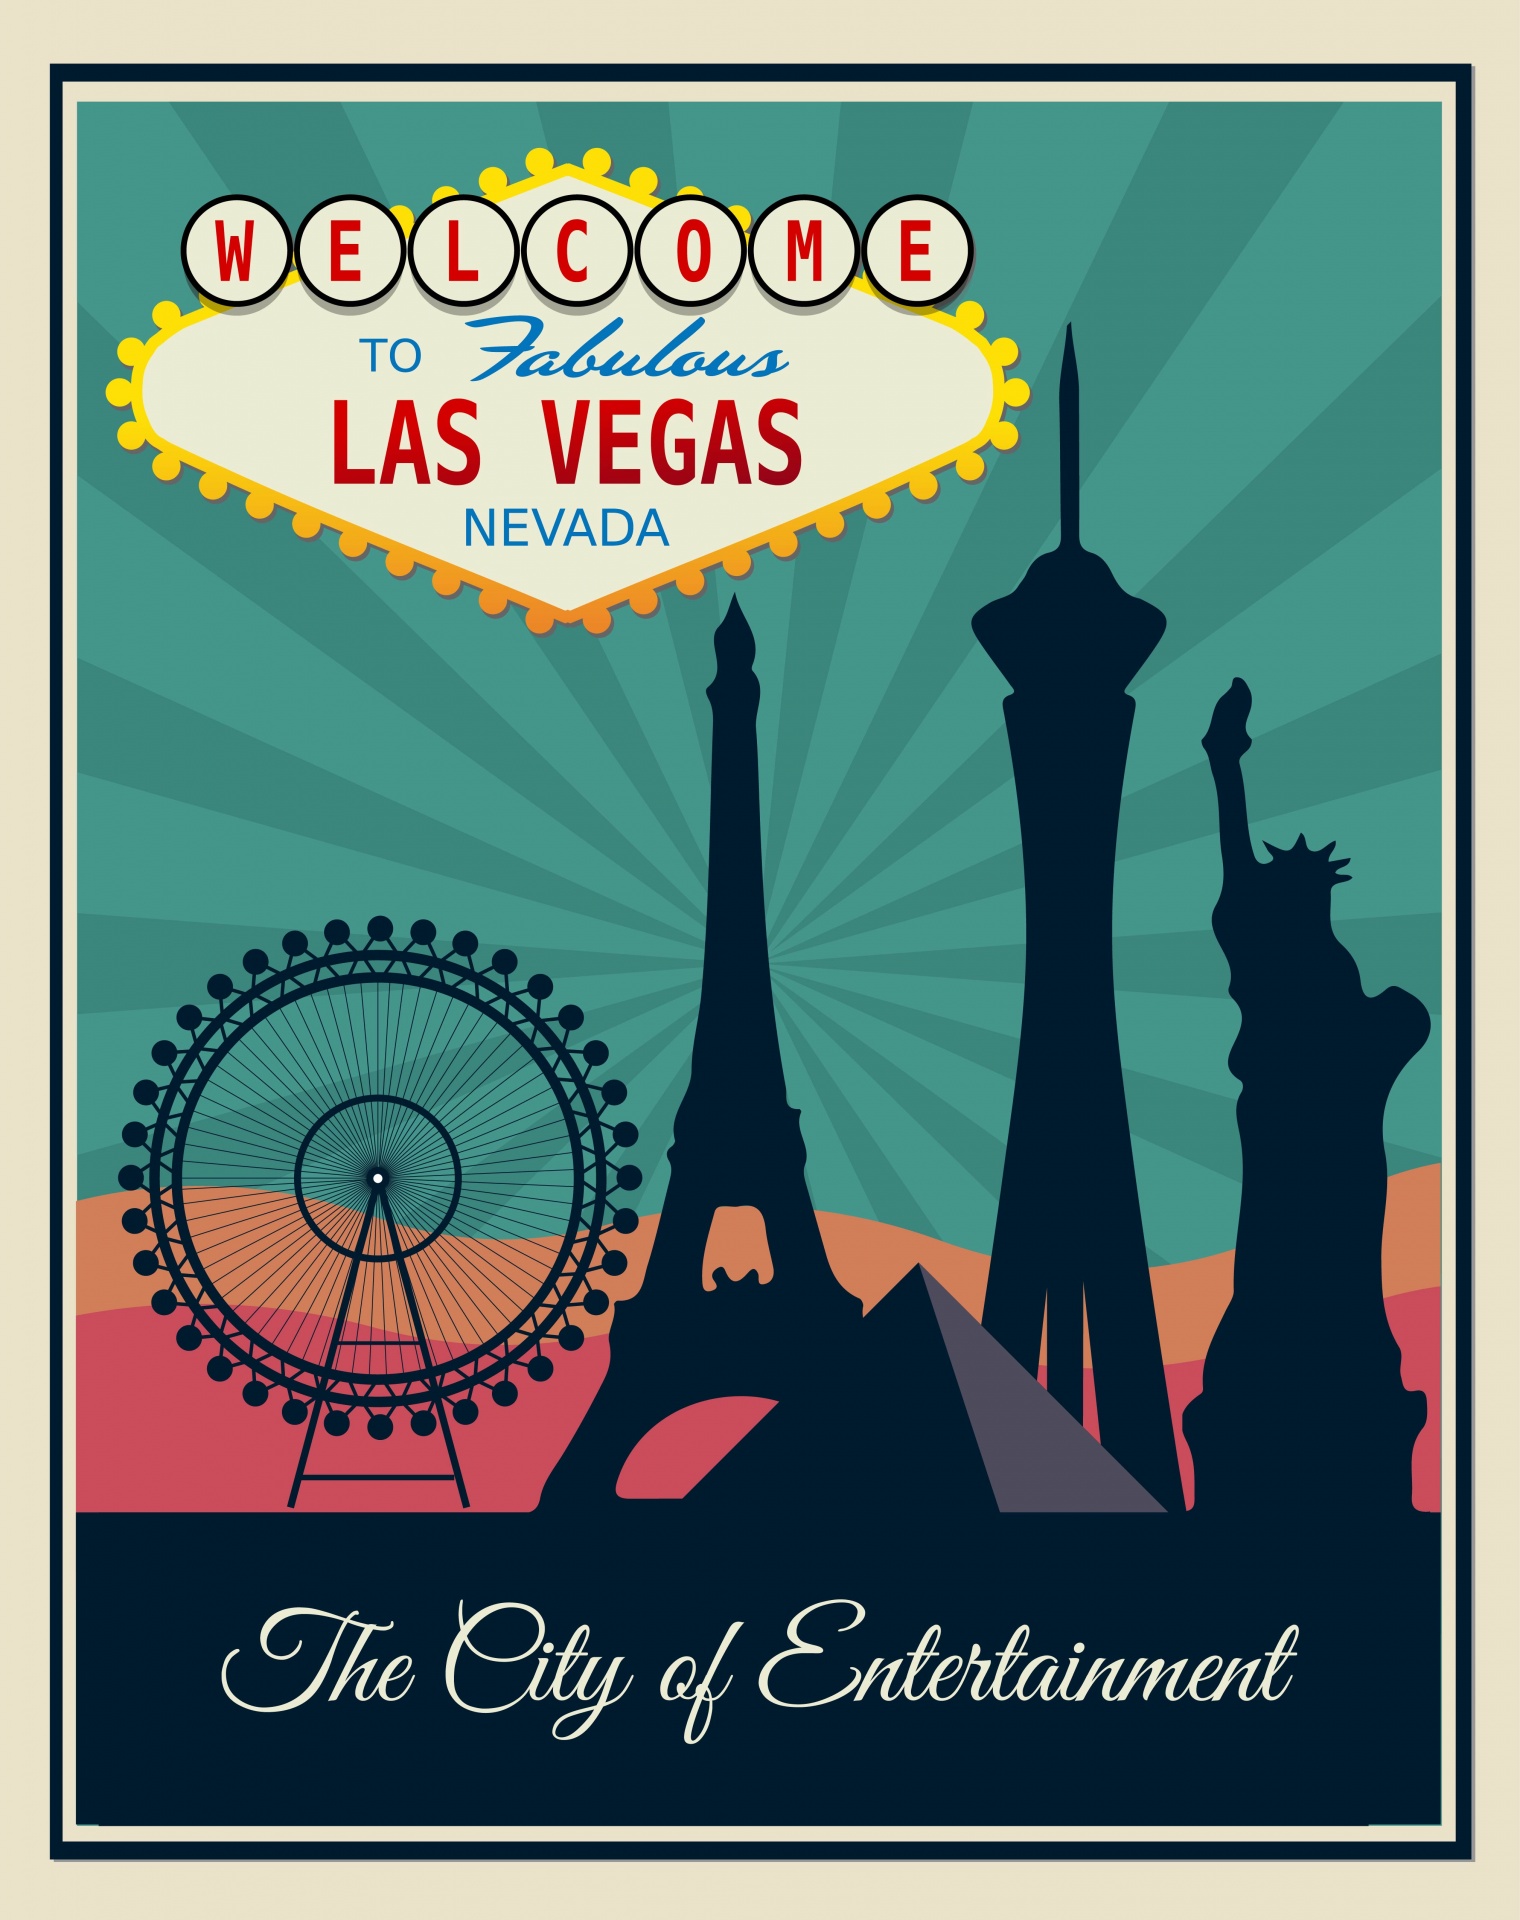 Modern vector illustration in retro, vintage style of a travel poster for Las Vegas, Nevada, USA, with famous welcome sign and city silhouette with eiffel tower, pryamids, statue of liberty